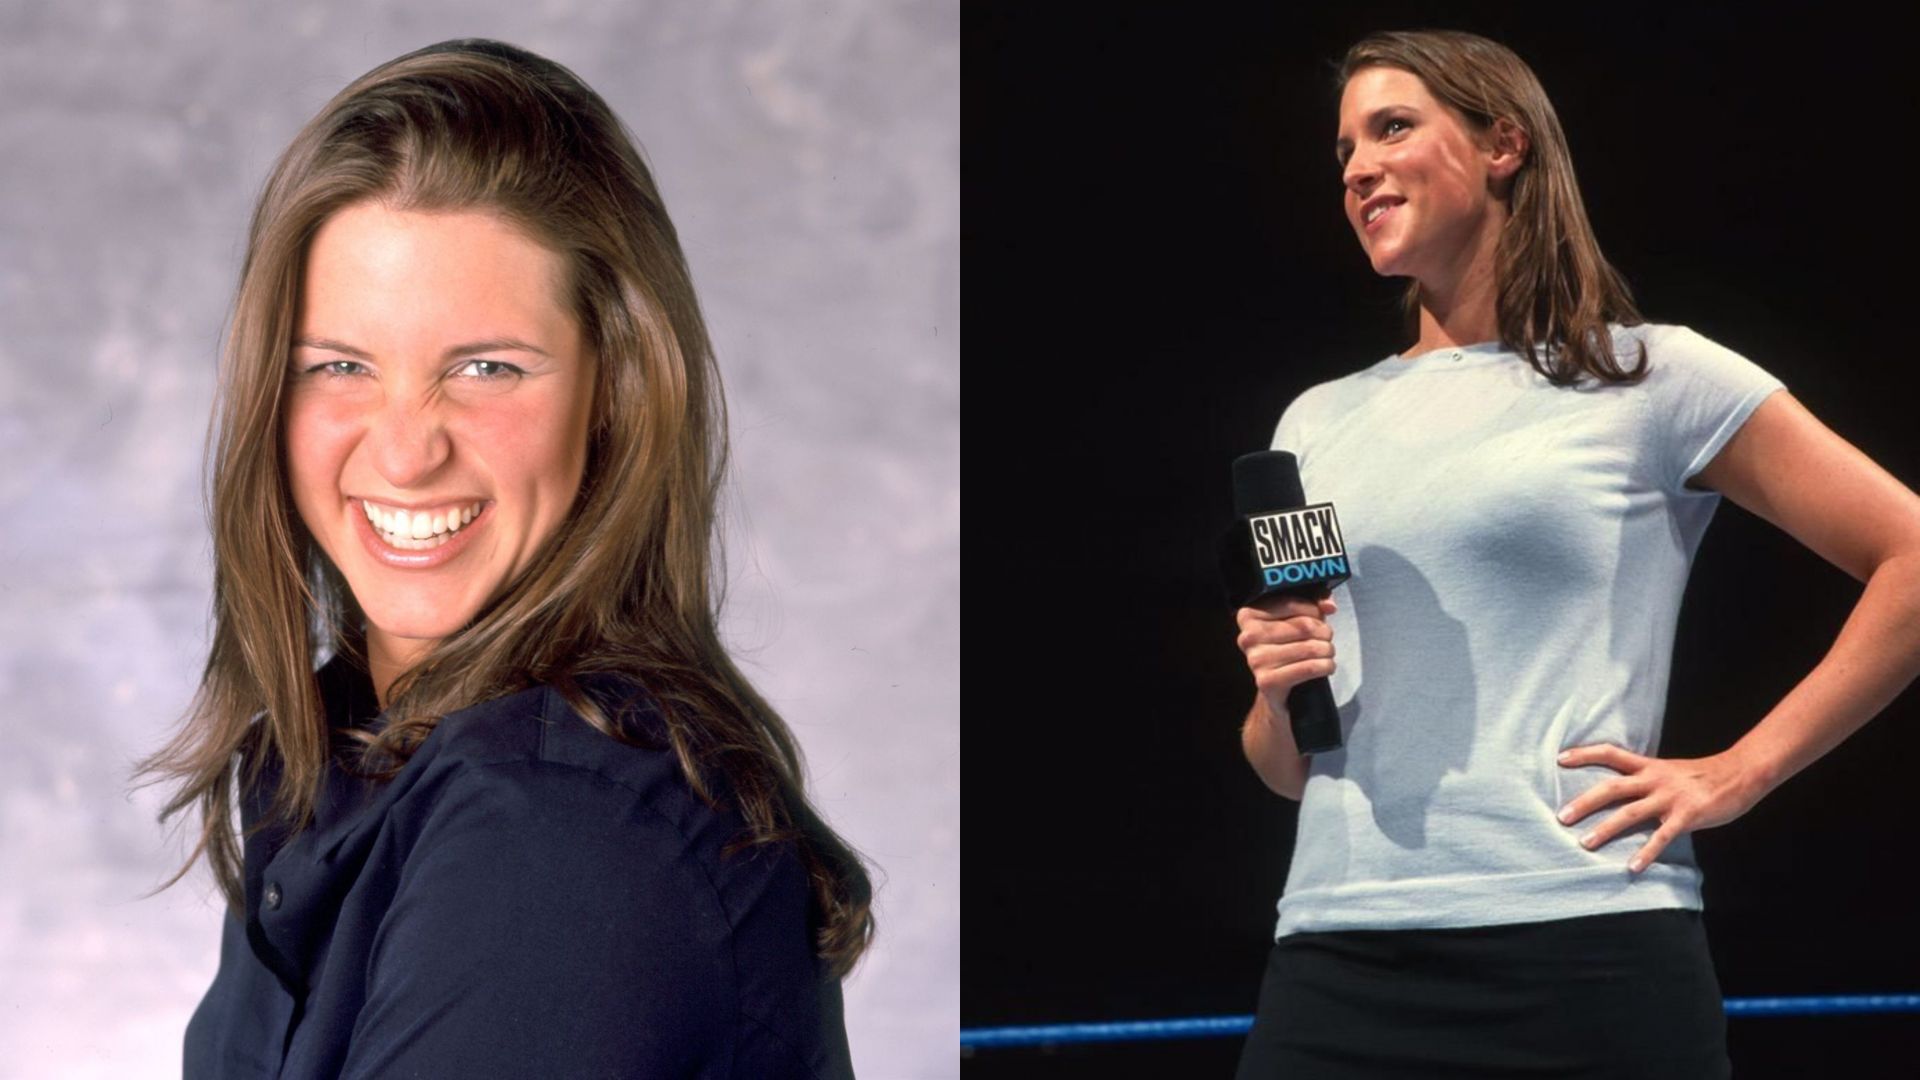 Stephanie McMahon was reportedly in a relationship with a baseball player in 1999